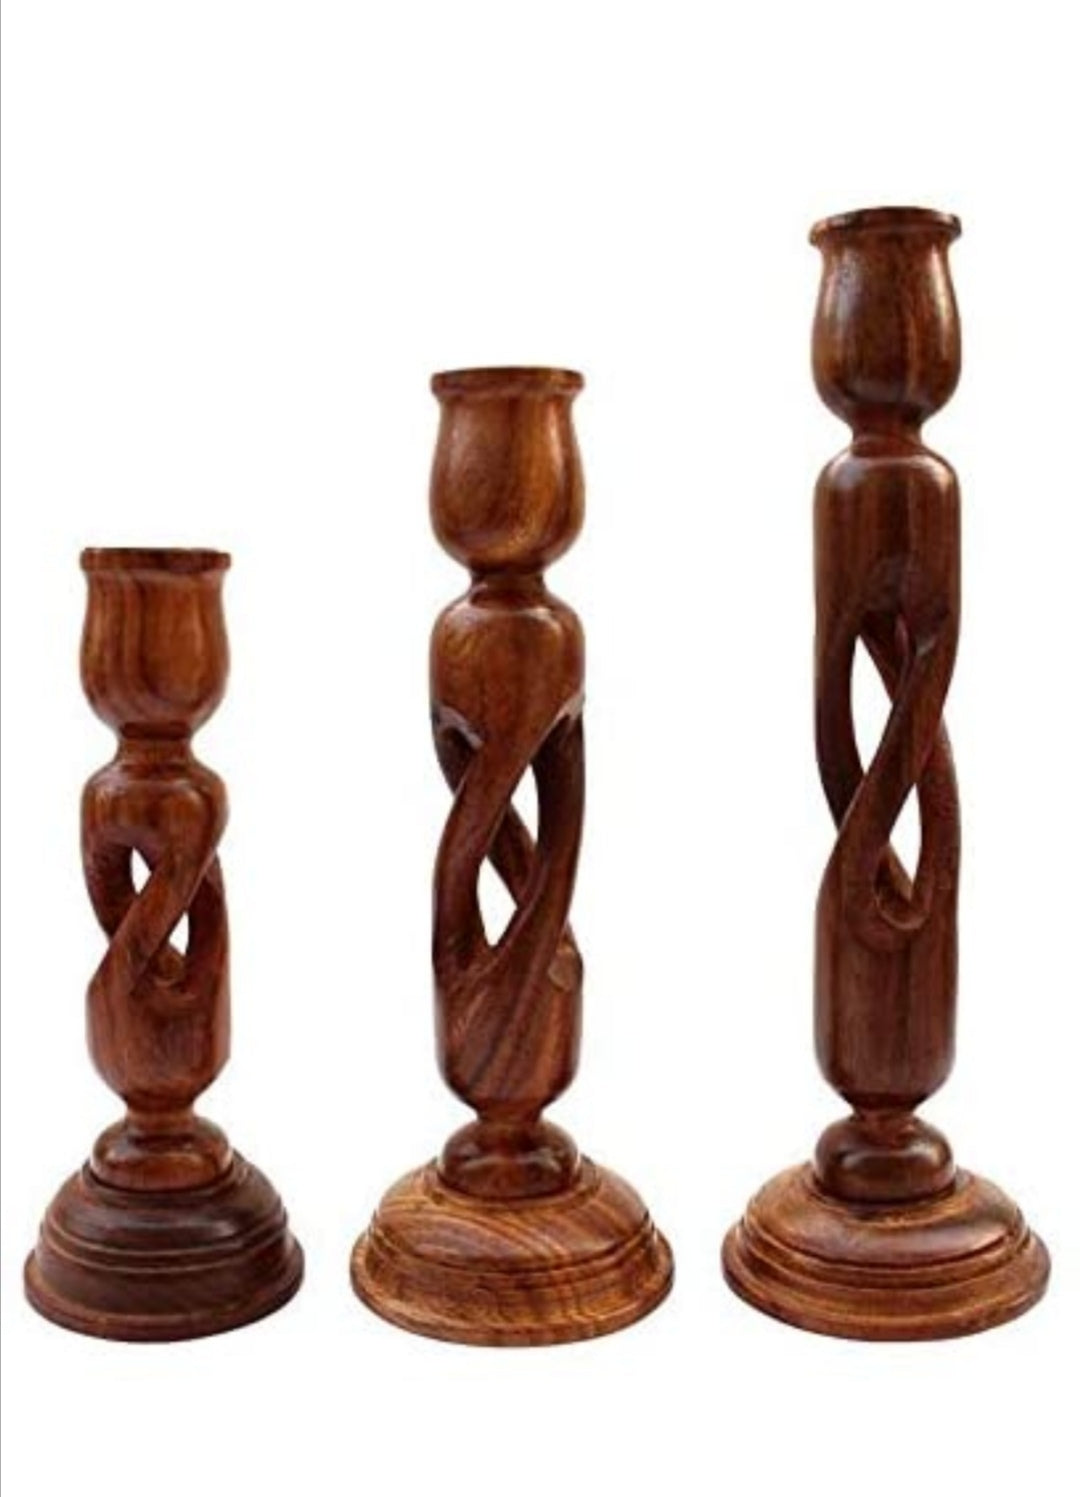 Wooden Candle Holder Stand for Home Décor | Tealight Gifts Item | Set of 3 | Large, Medium and Small